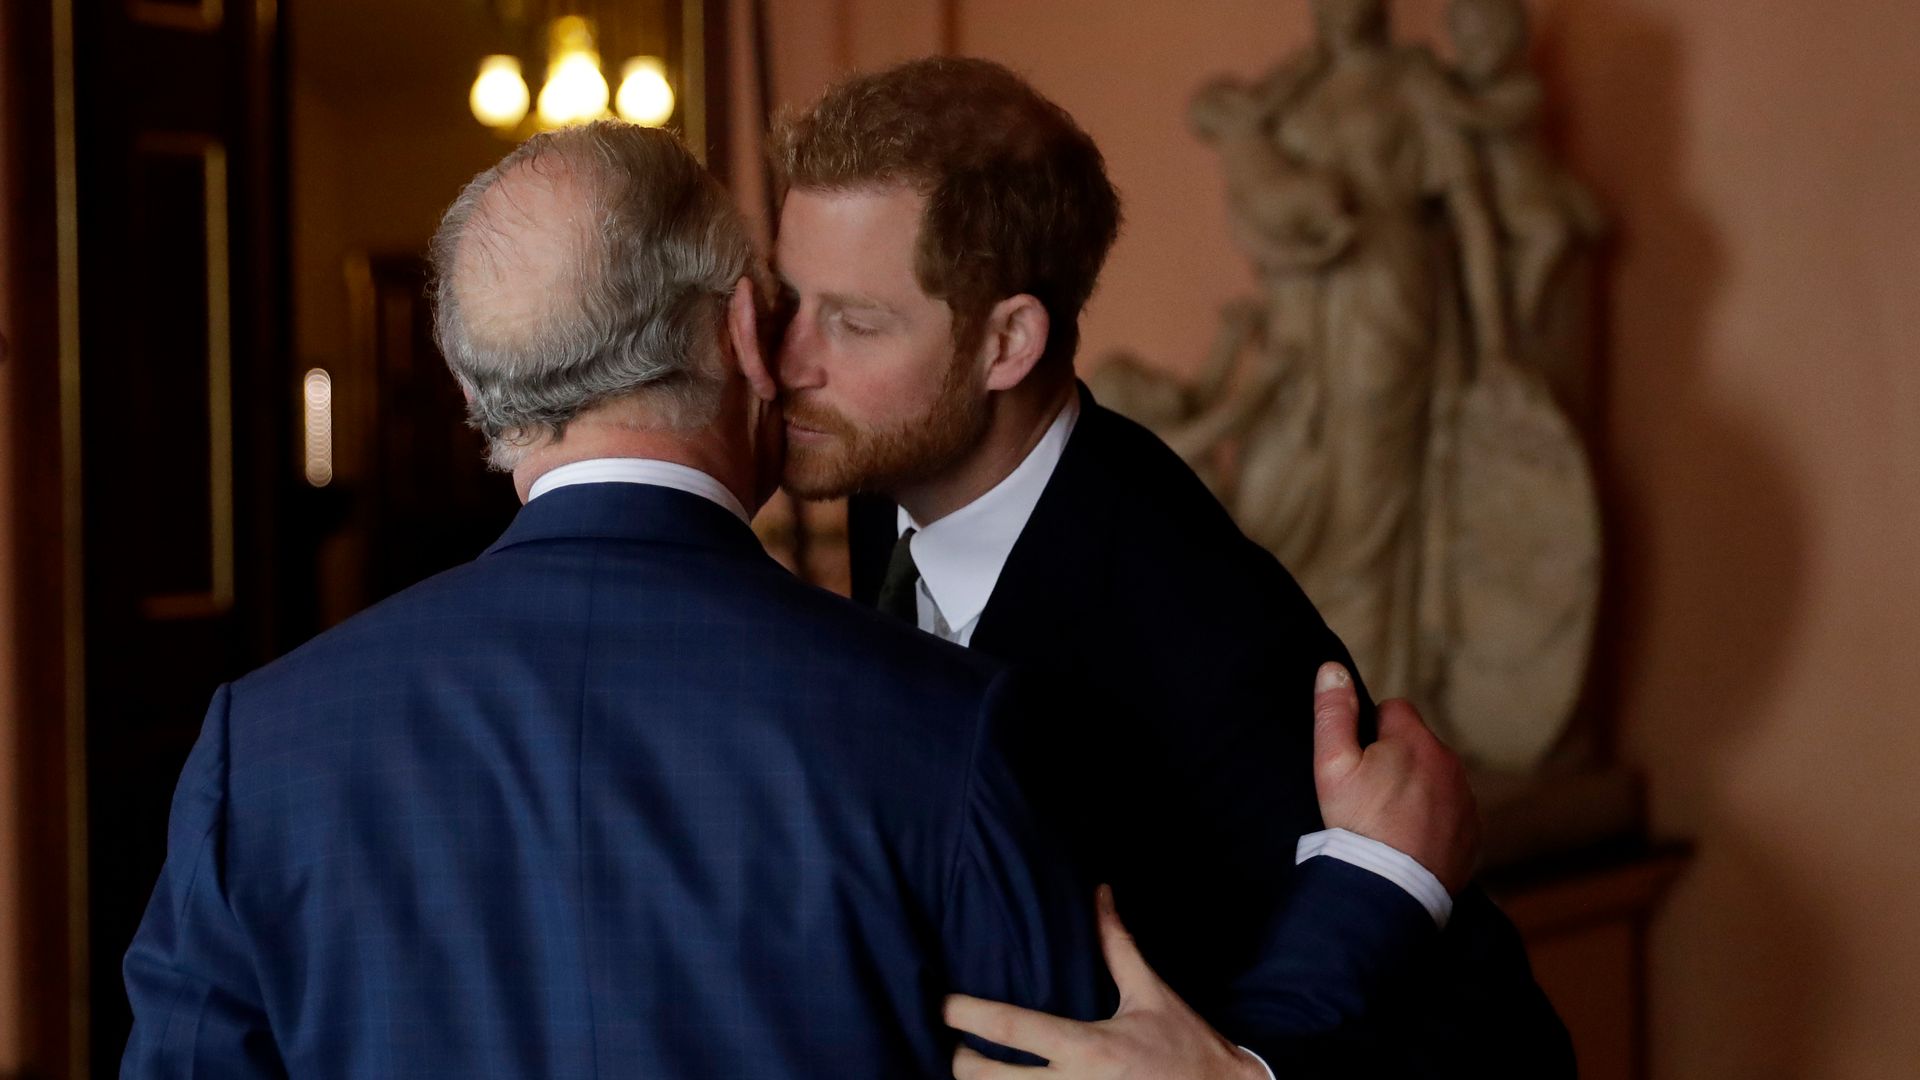 Prince Harry and his dad Charles had a good relationship - seen here together in 2018